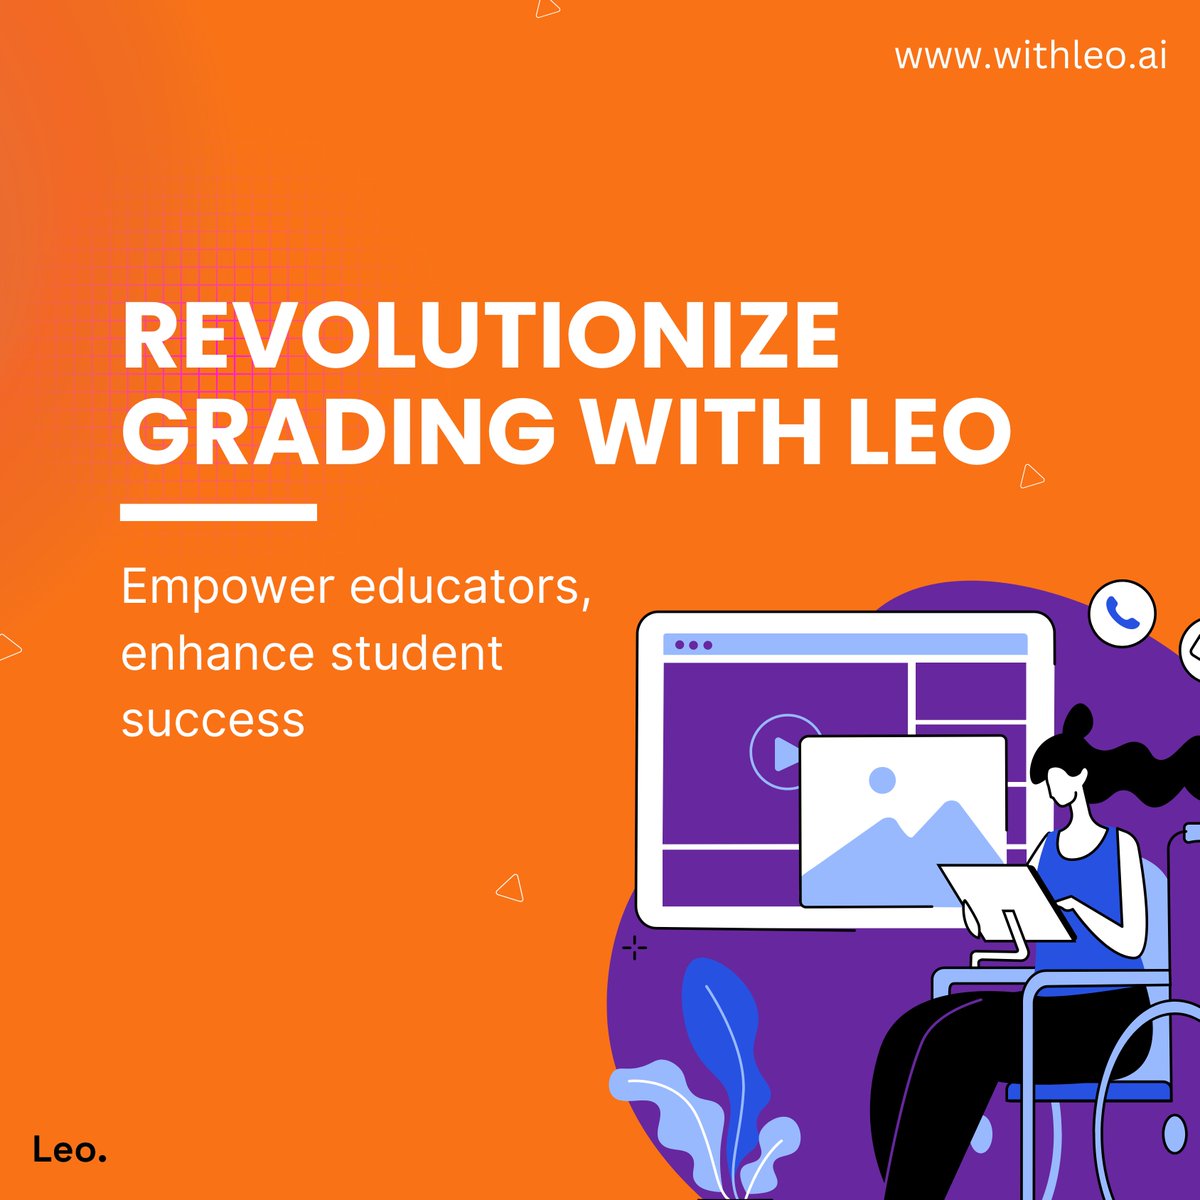 Optimize grading at your school with Leo: an AI system saving time, offering insights into student progress, ensuring fairness, and boosting educational standards. Explore the future of #education at withleo.ai #AI #edtech #teaching #AIinEducation #TeacherTools